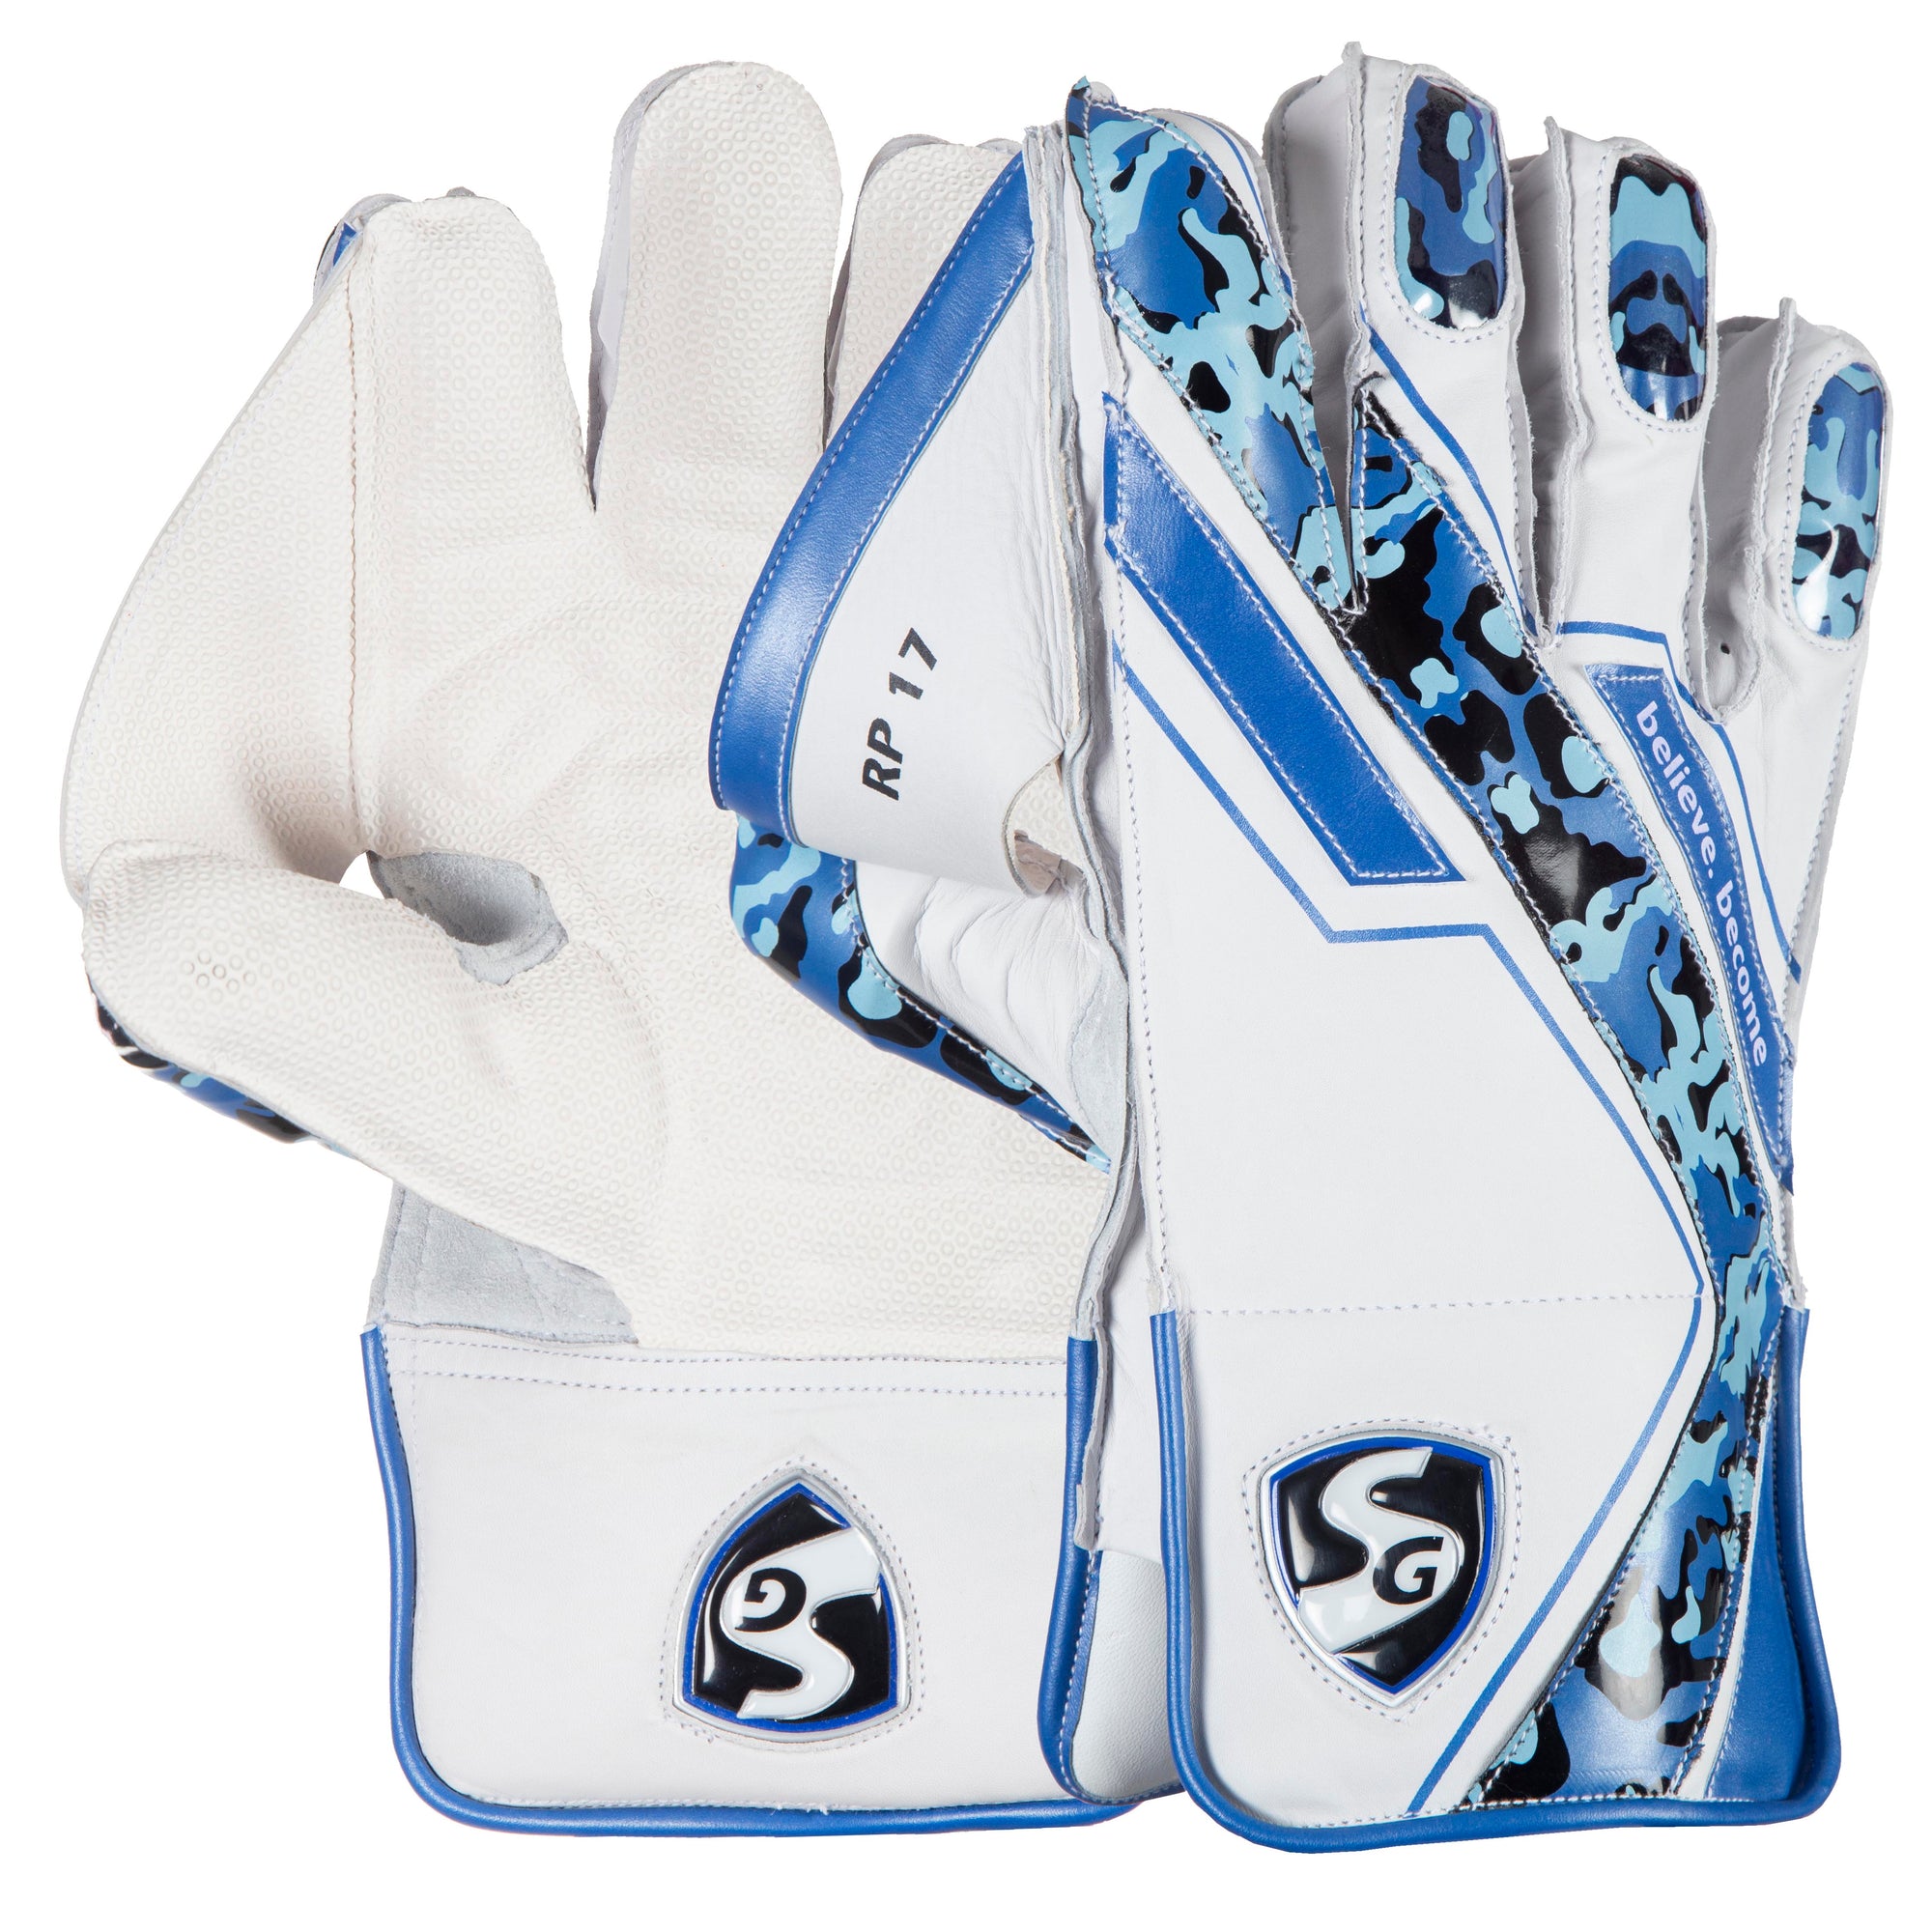 SG RP 17 WICKET KEEPING GLOVES - 2023